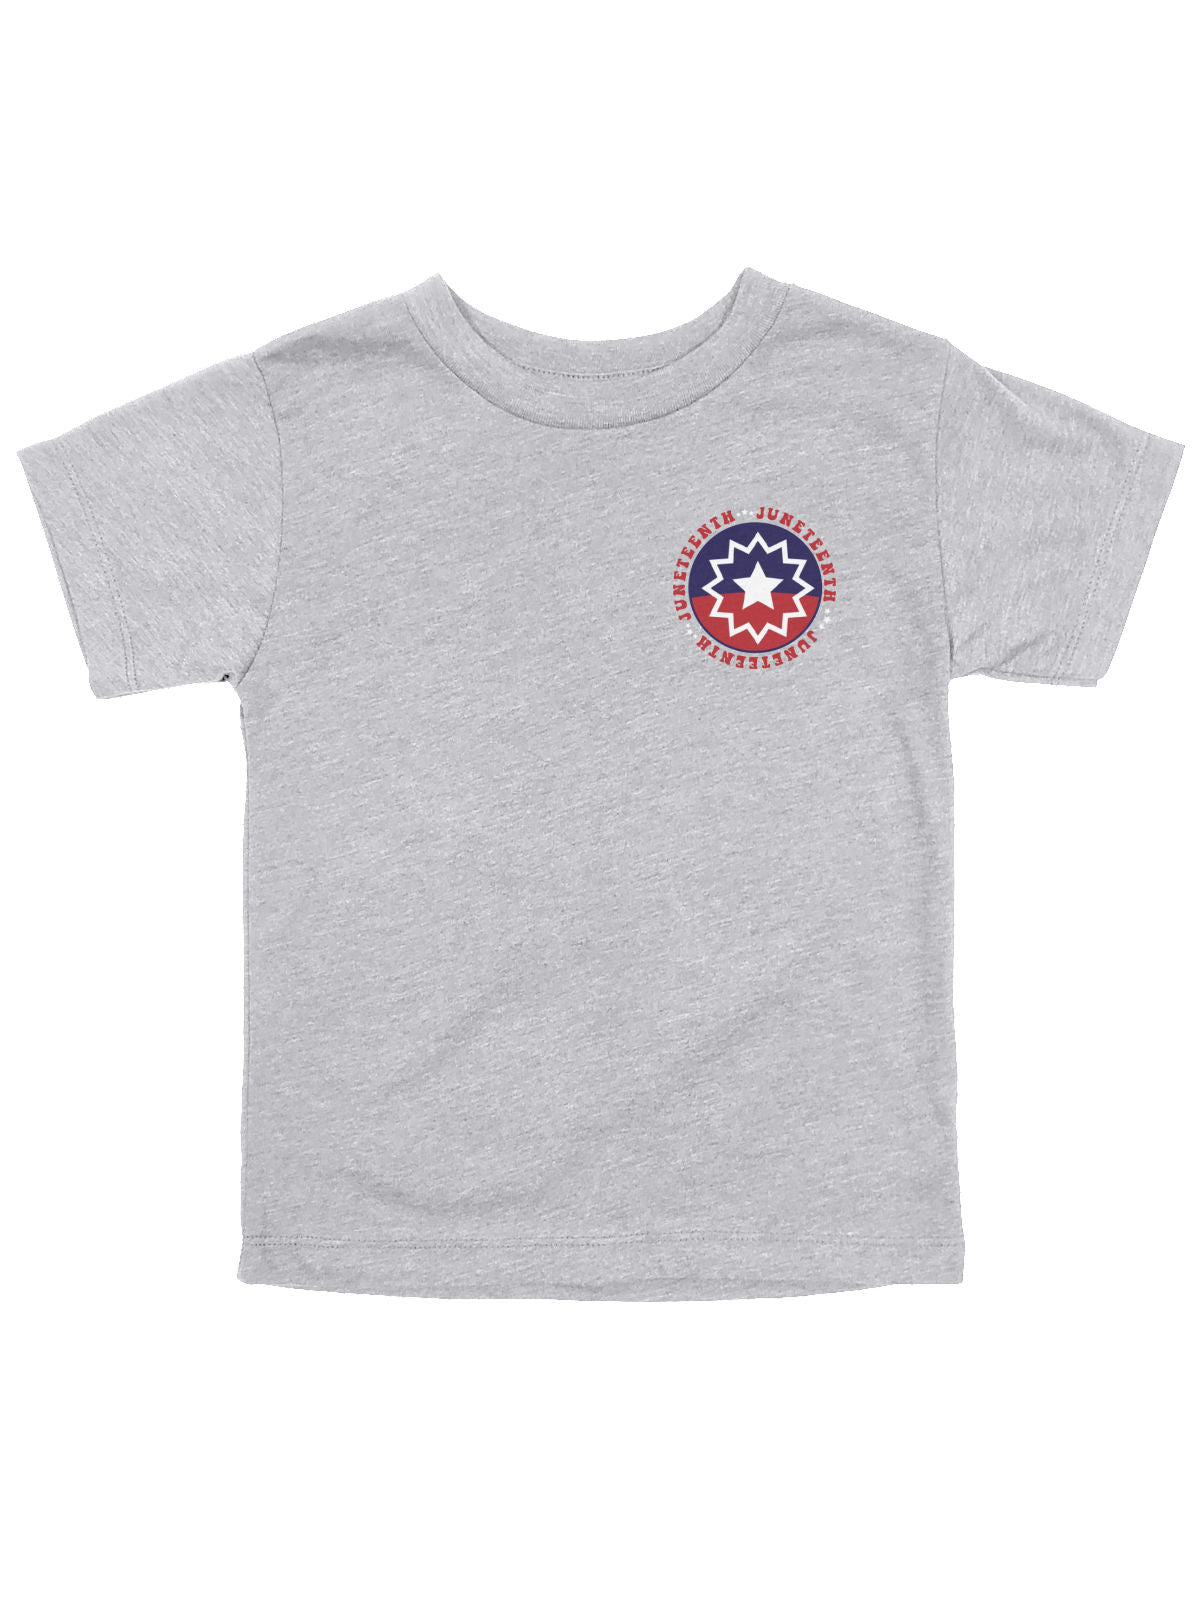 Juneteenth Flag Shirt for Kids in Heather Gray